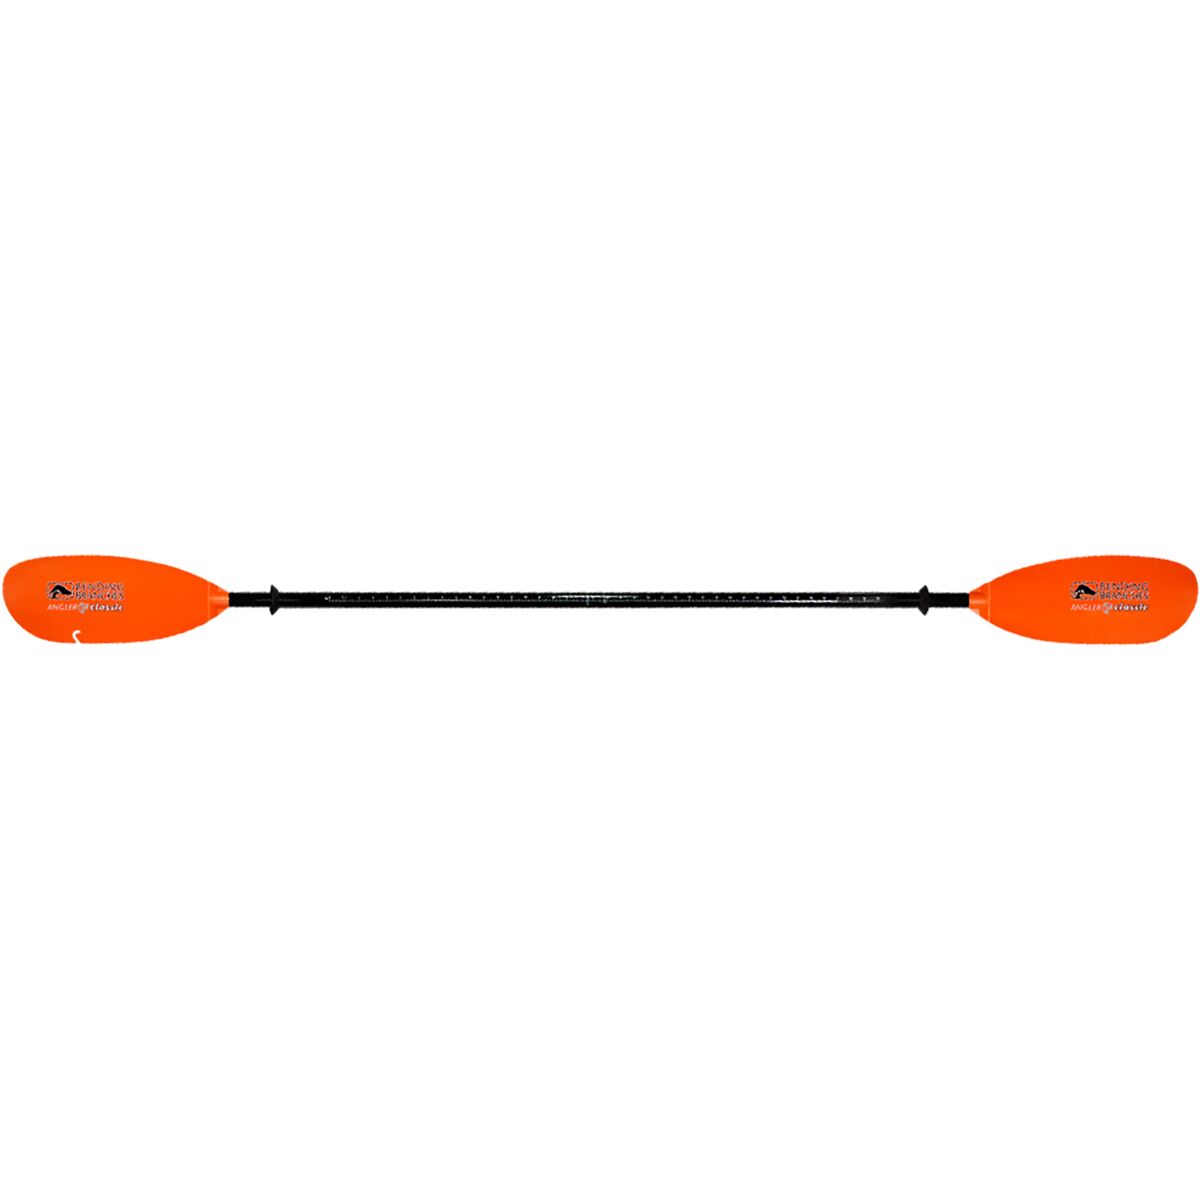 Bending Branches Classic 2-Piece Snap-Button Angler Paddle - 2022 Orange 220cm